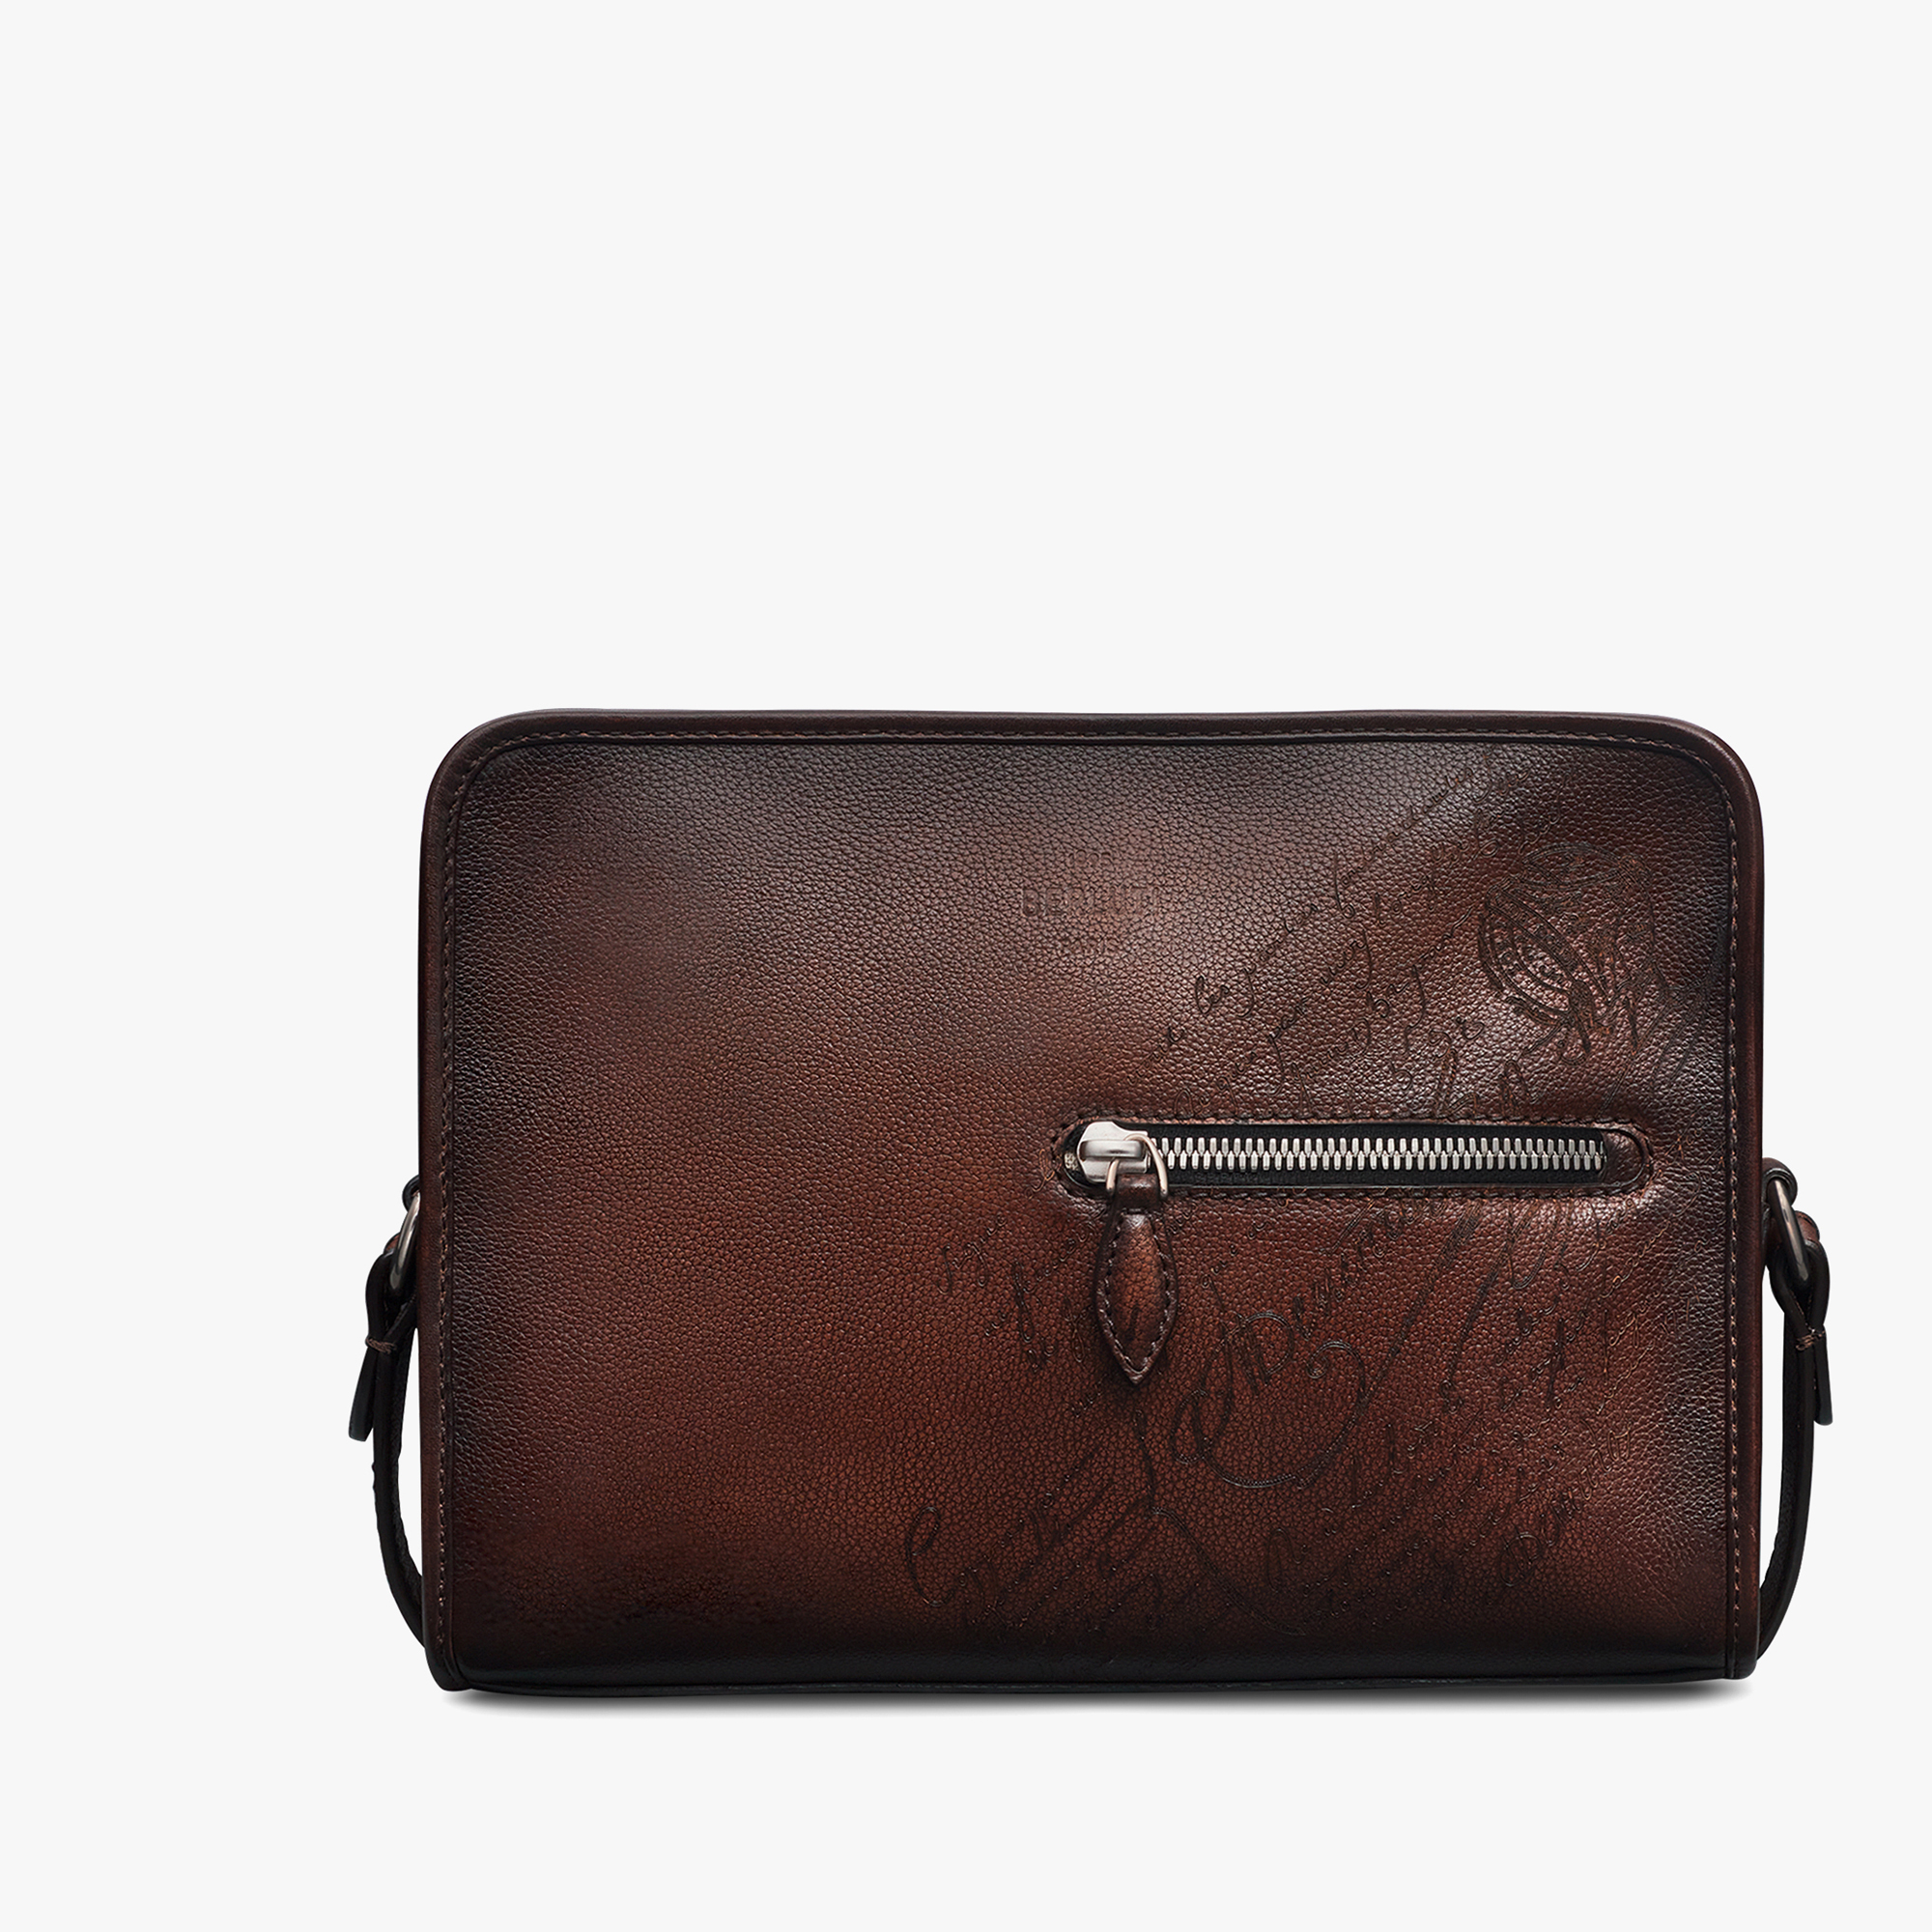 Journalier Scritto Leather Messenger, SOFT BROWN, hi-res